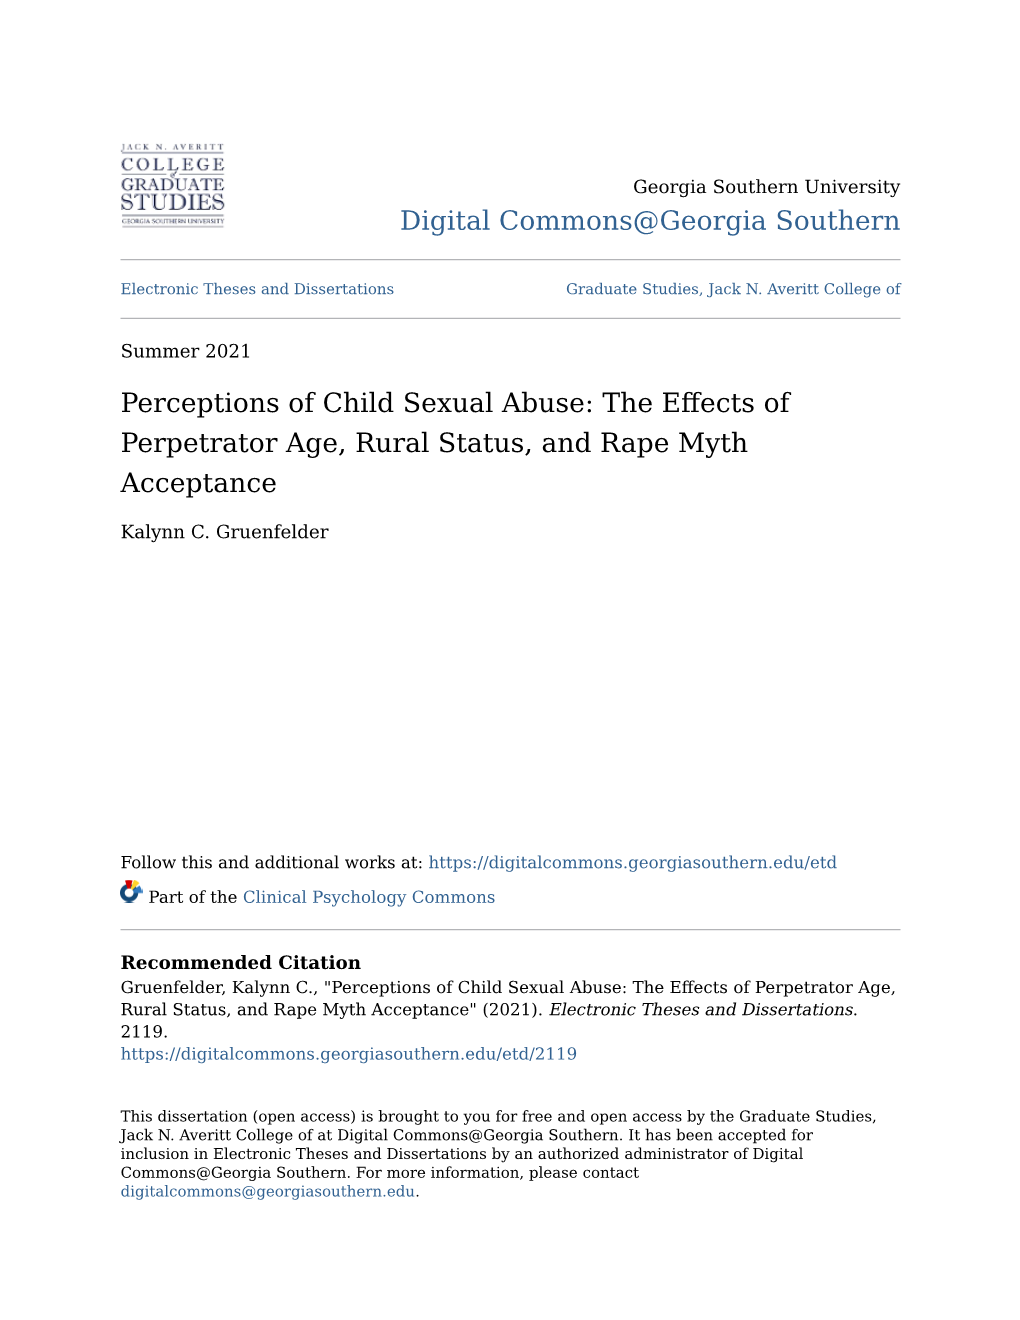 The Effects of Perpetrator Age, Rural Status, and Rape Myth Acceptance